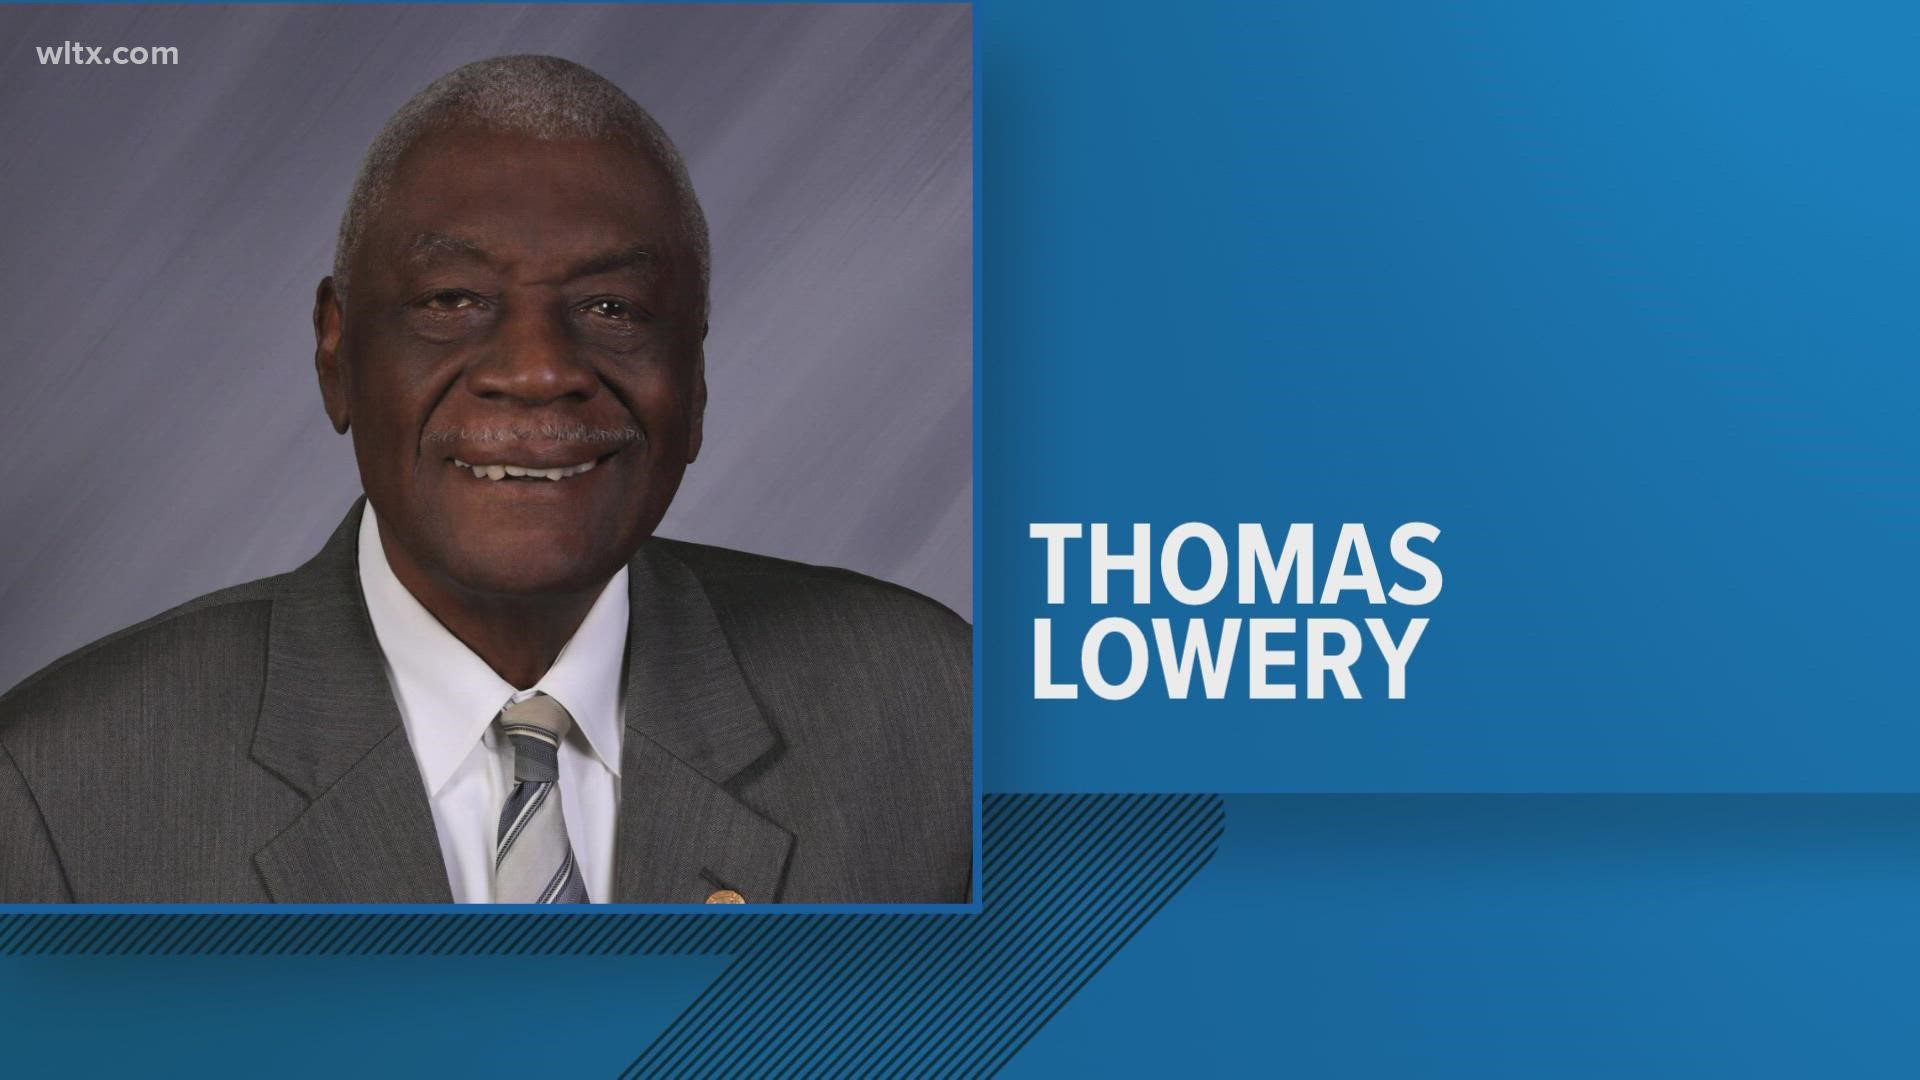 A city spokesperson said that Mayor Pro-Tem Thomas "Bubba" Lowery died on Wednesday.